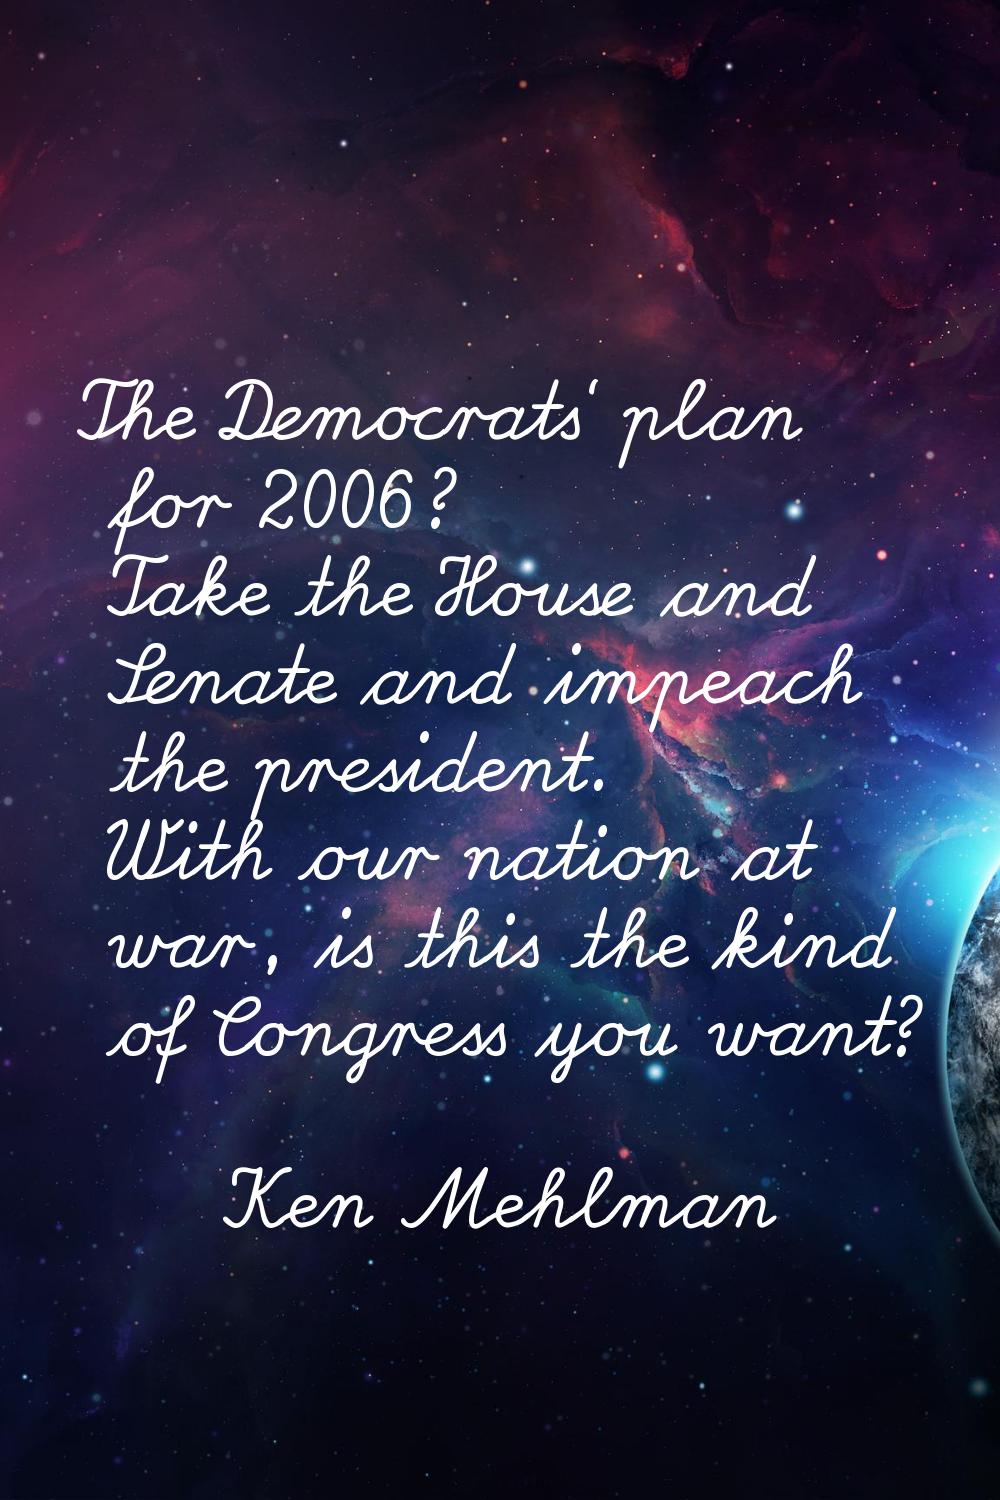 The Democrats' plan for 2006? Take the House and Senate and impeach the president. With our nation 